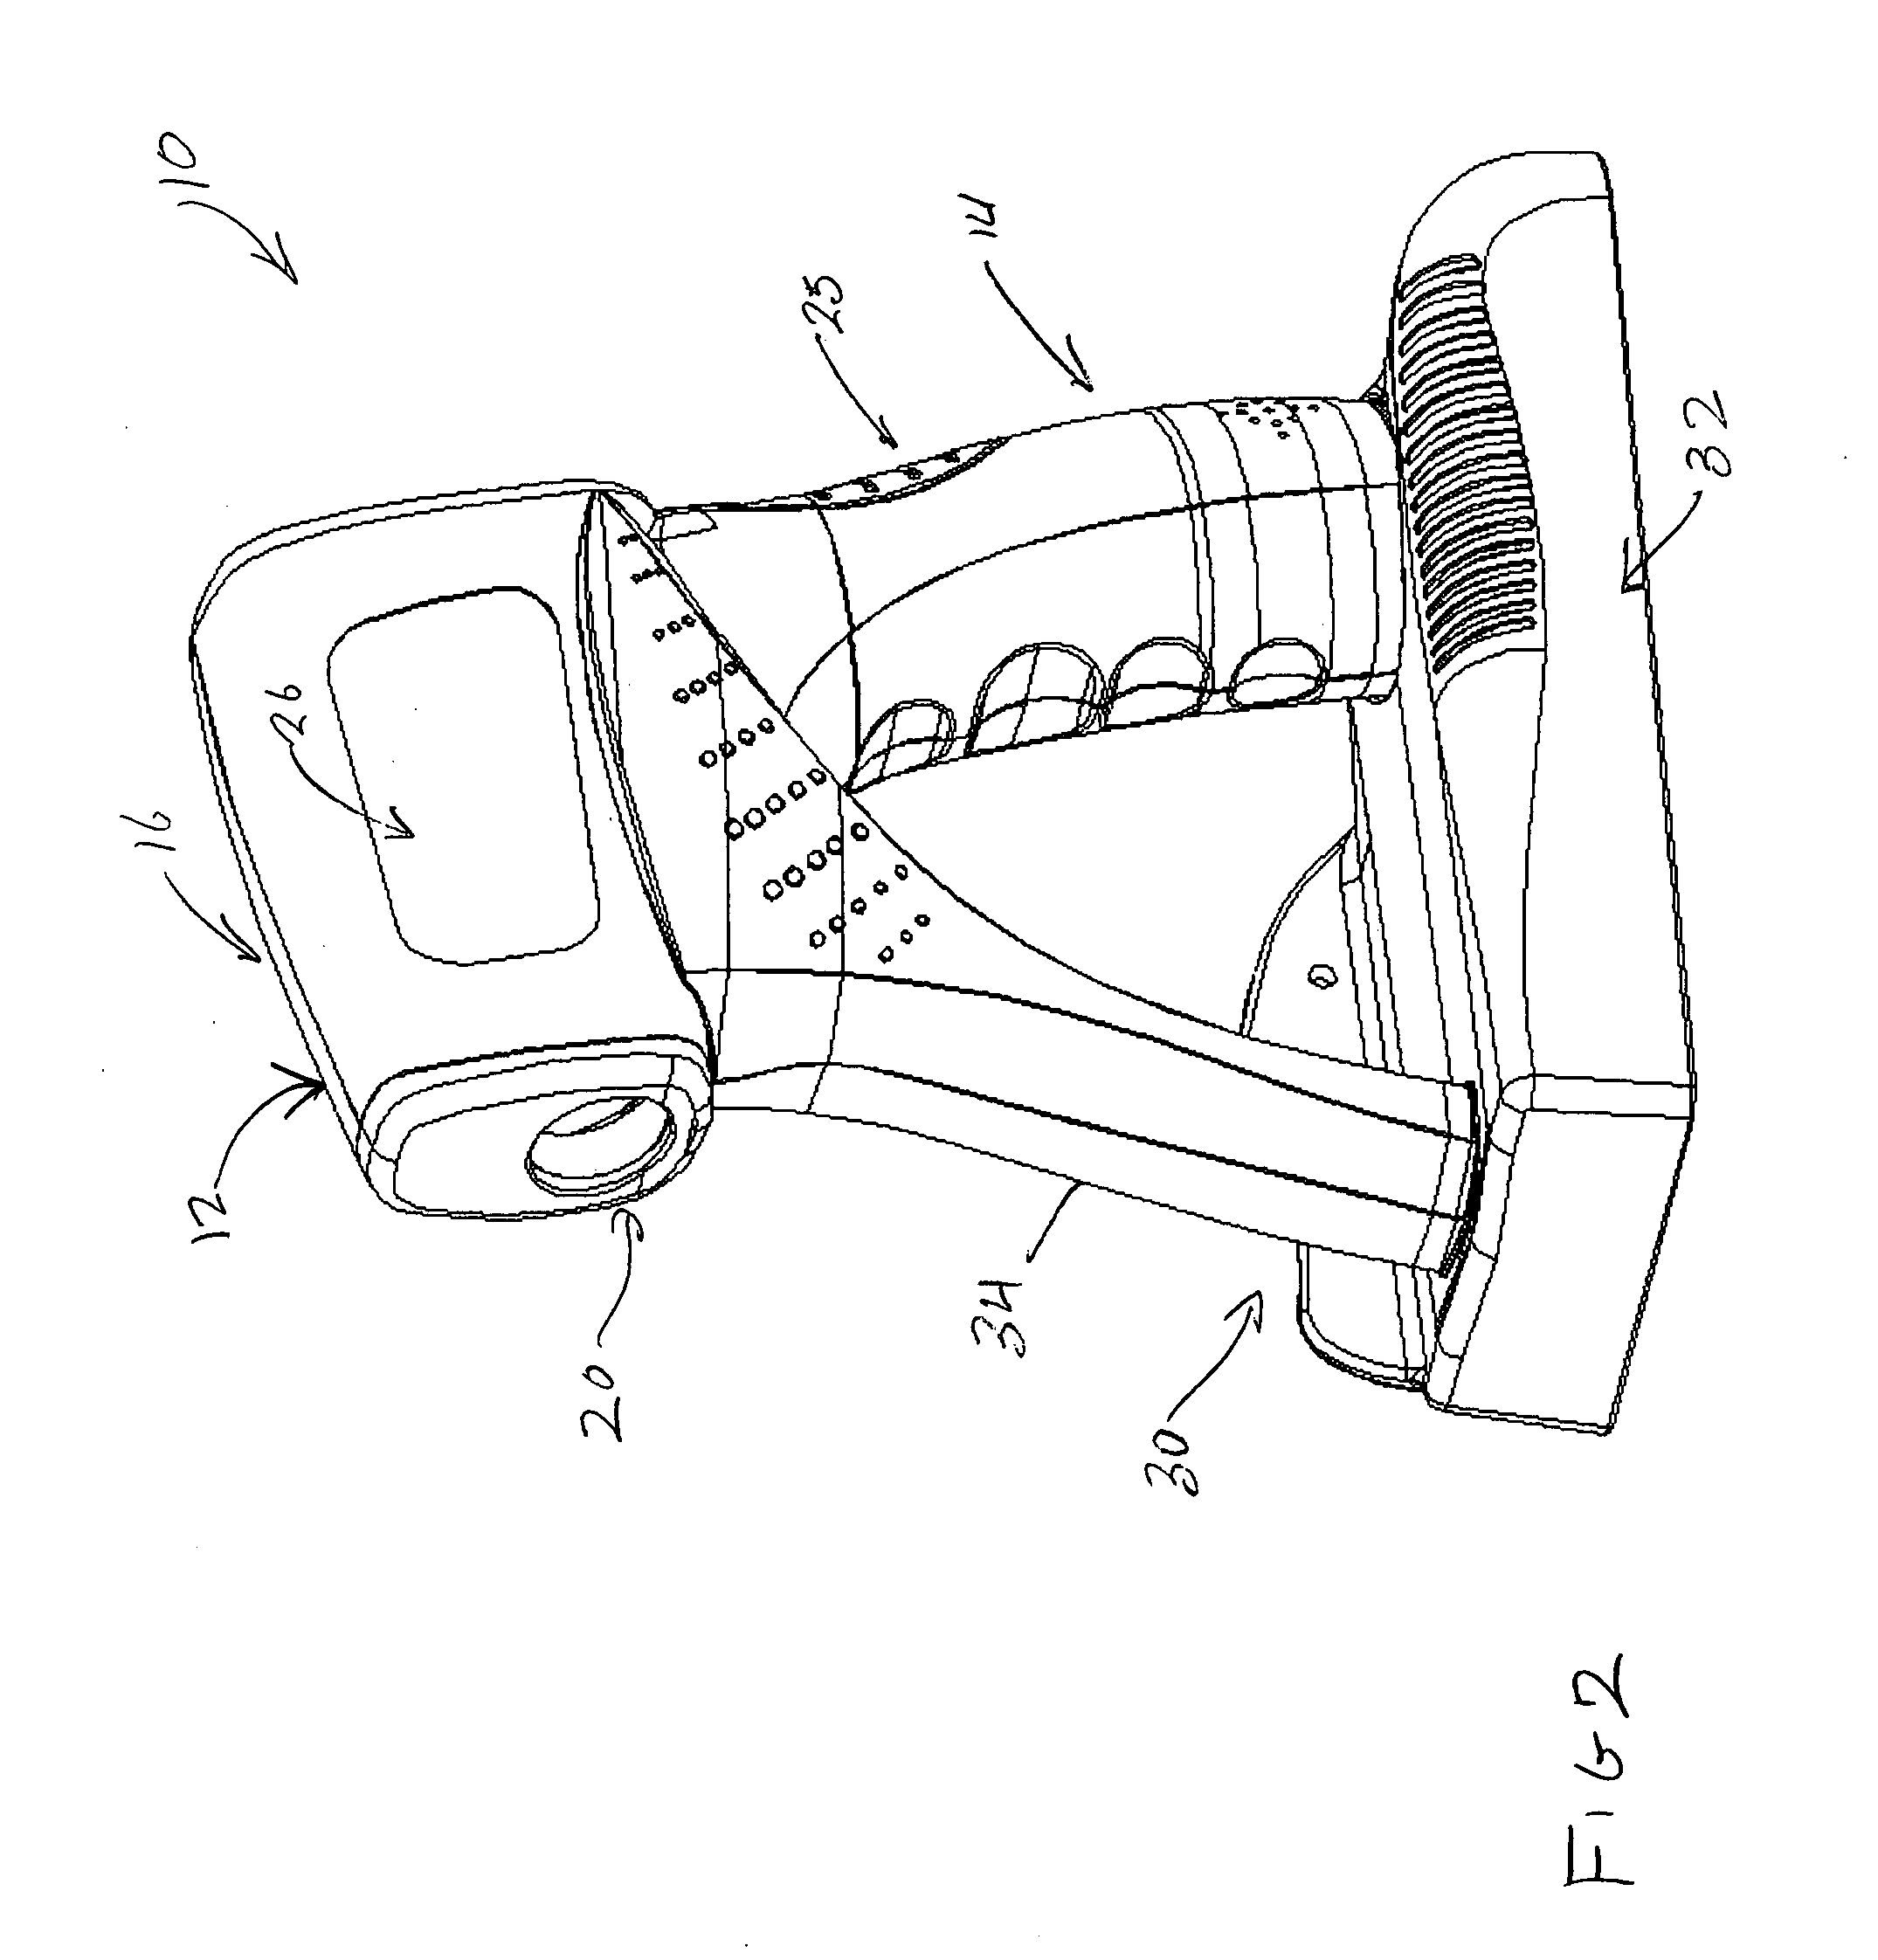 Non-invasive medical data collecting assembly